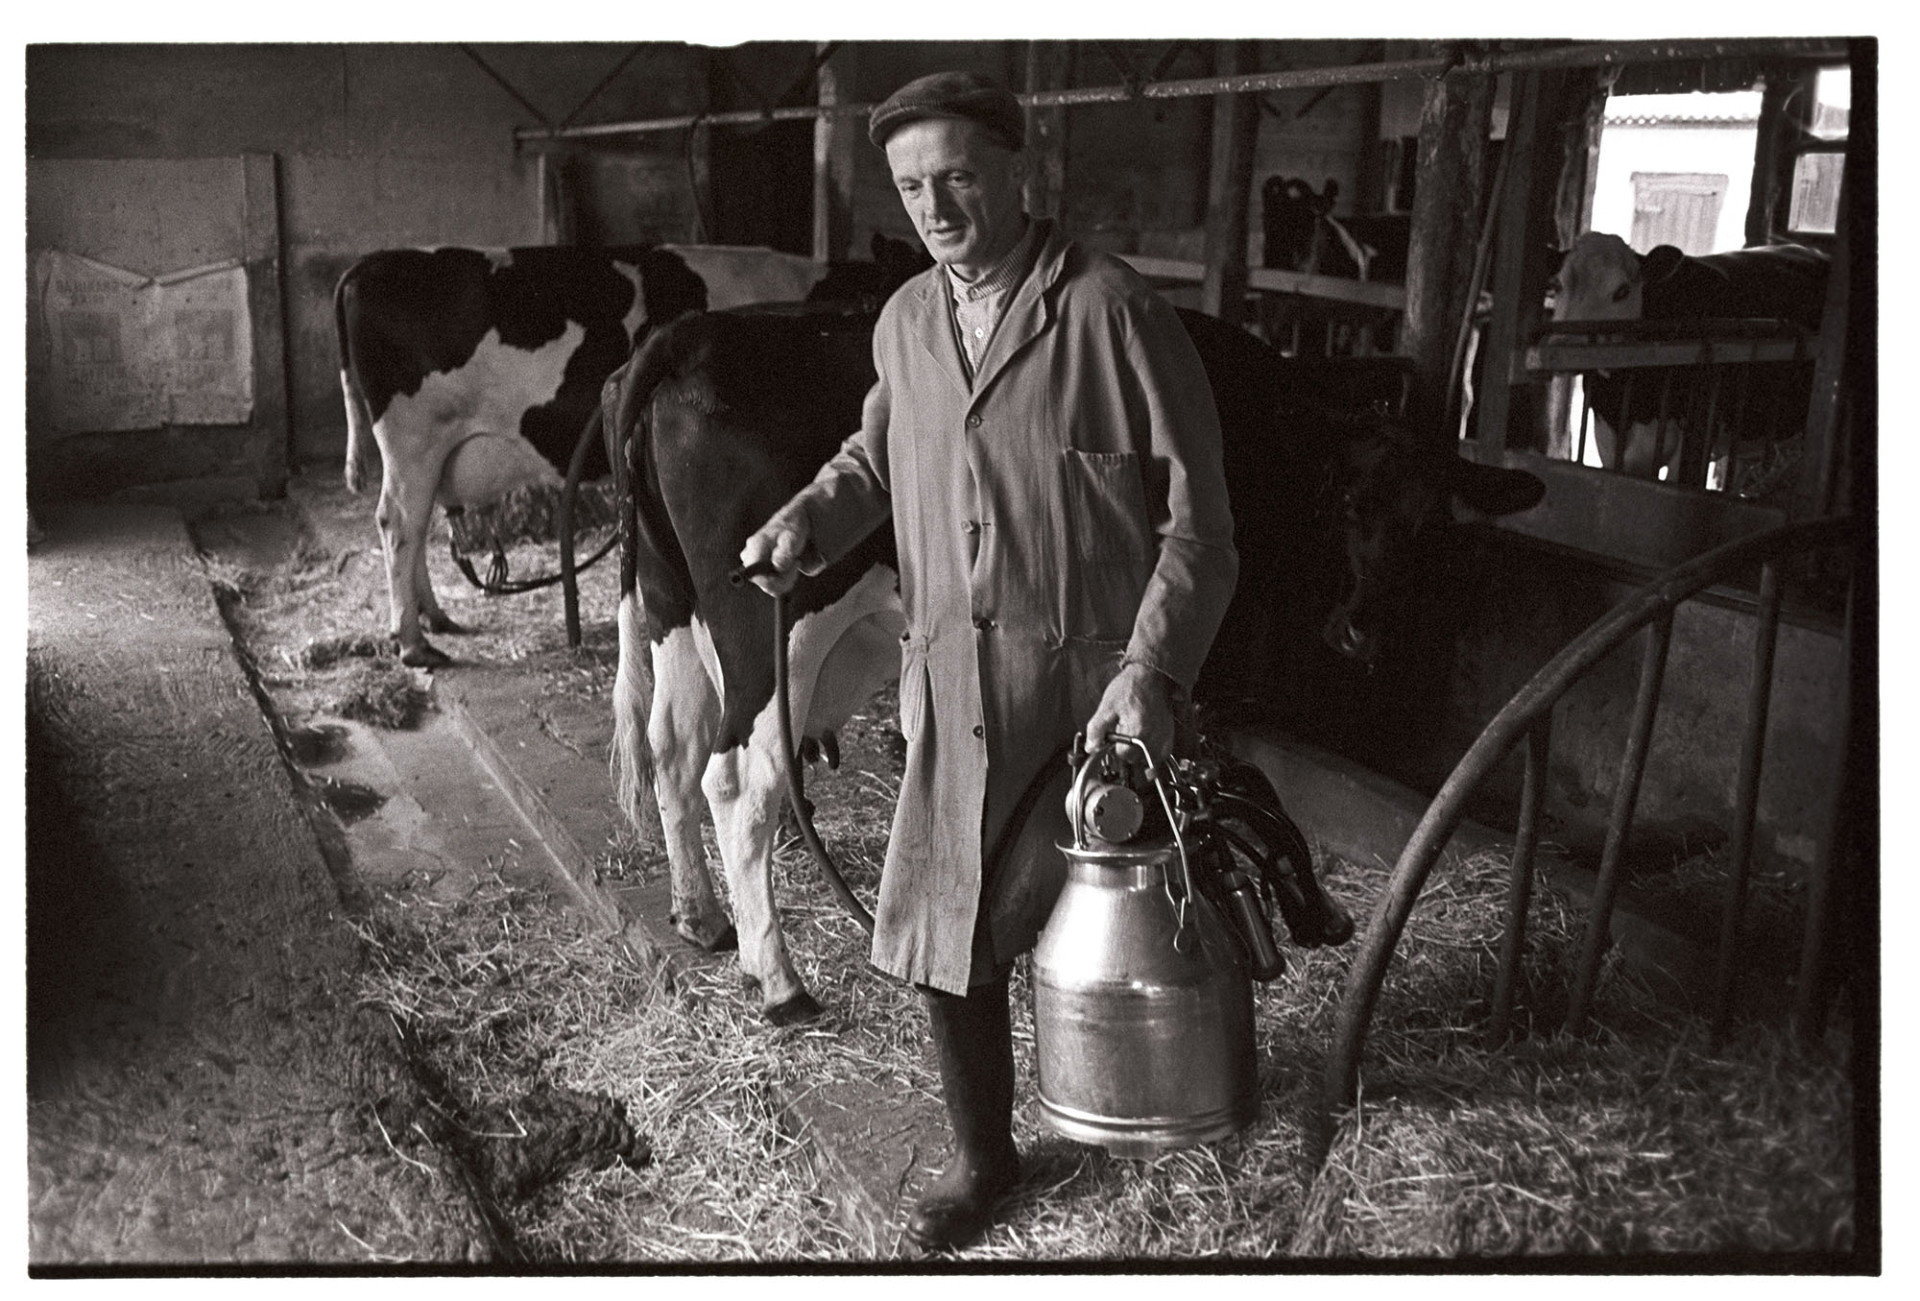 Farmer with milking machine in parlour. 
[Ken Adams carrying a milking machine in a dairy parlour at South Worden, Shebbear. Cows are being milked in the background.]